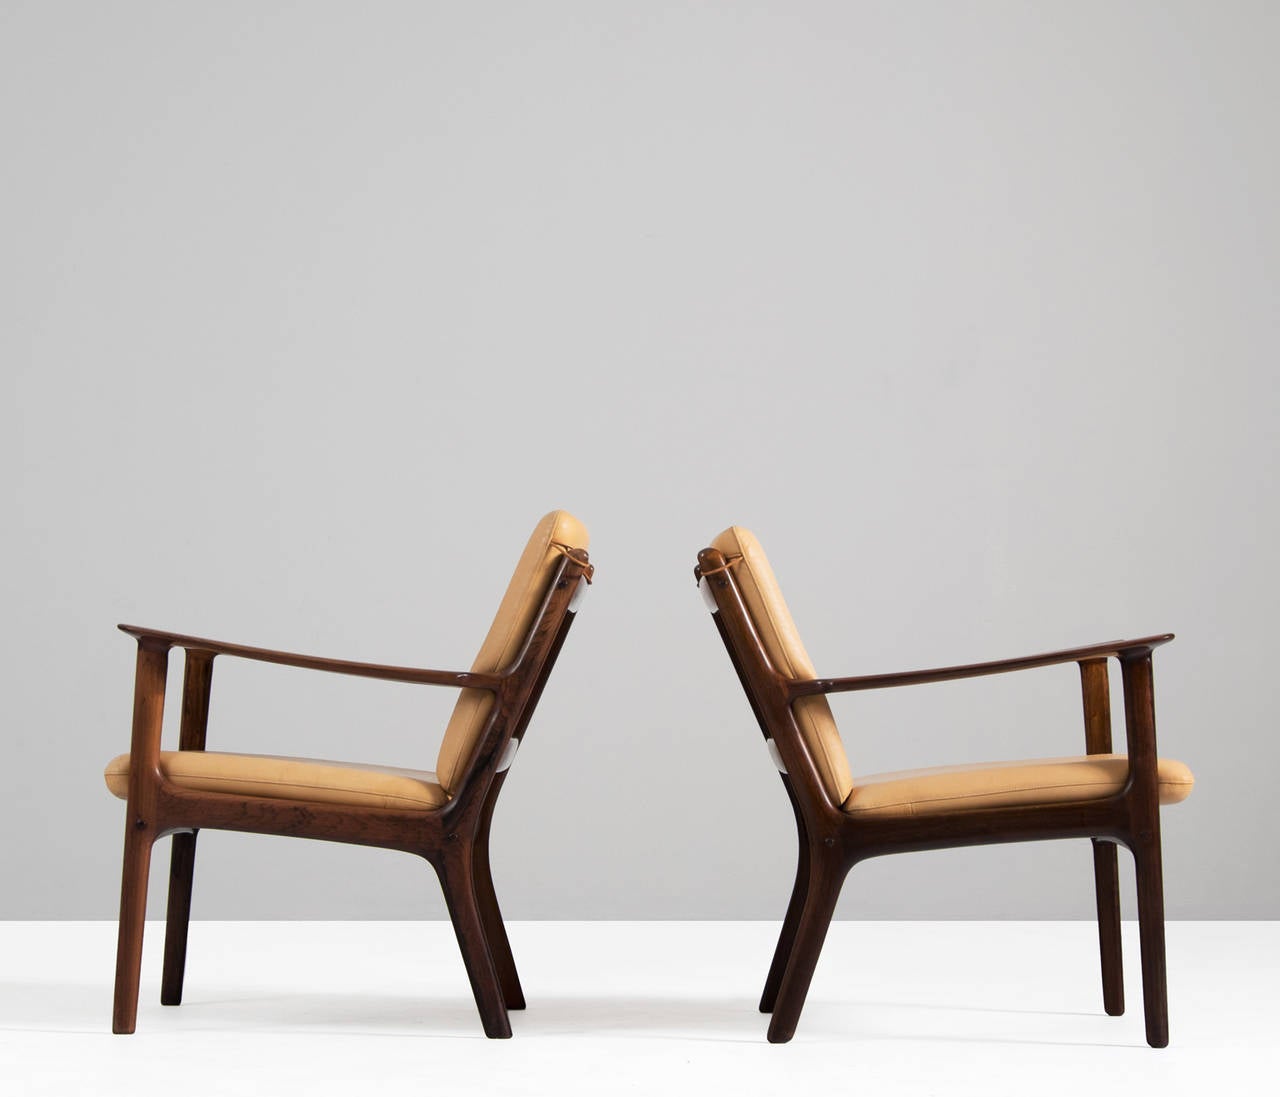 Wonderful pair of lounge chairs by Ole Wanscher, Denmark, 1960s.

This pair of chairs is made of solid rosewood and upholstered in high quality natural leather. Excellent finish or grain of the wood and great wood joints. Open design with a very